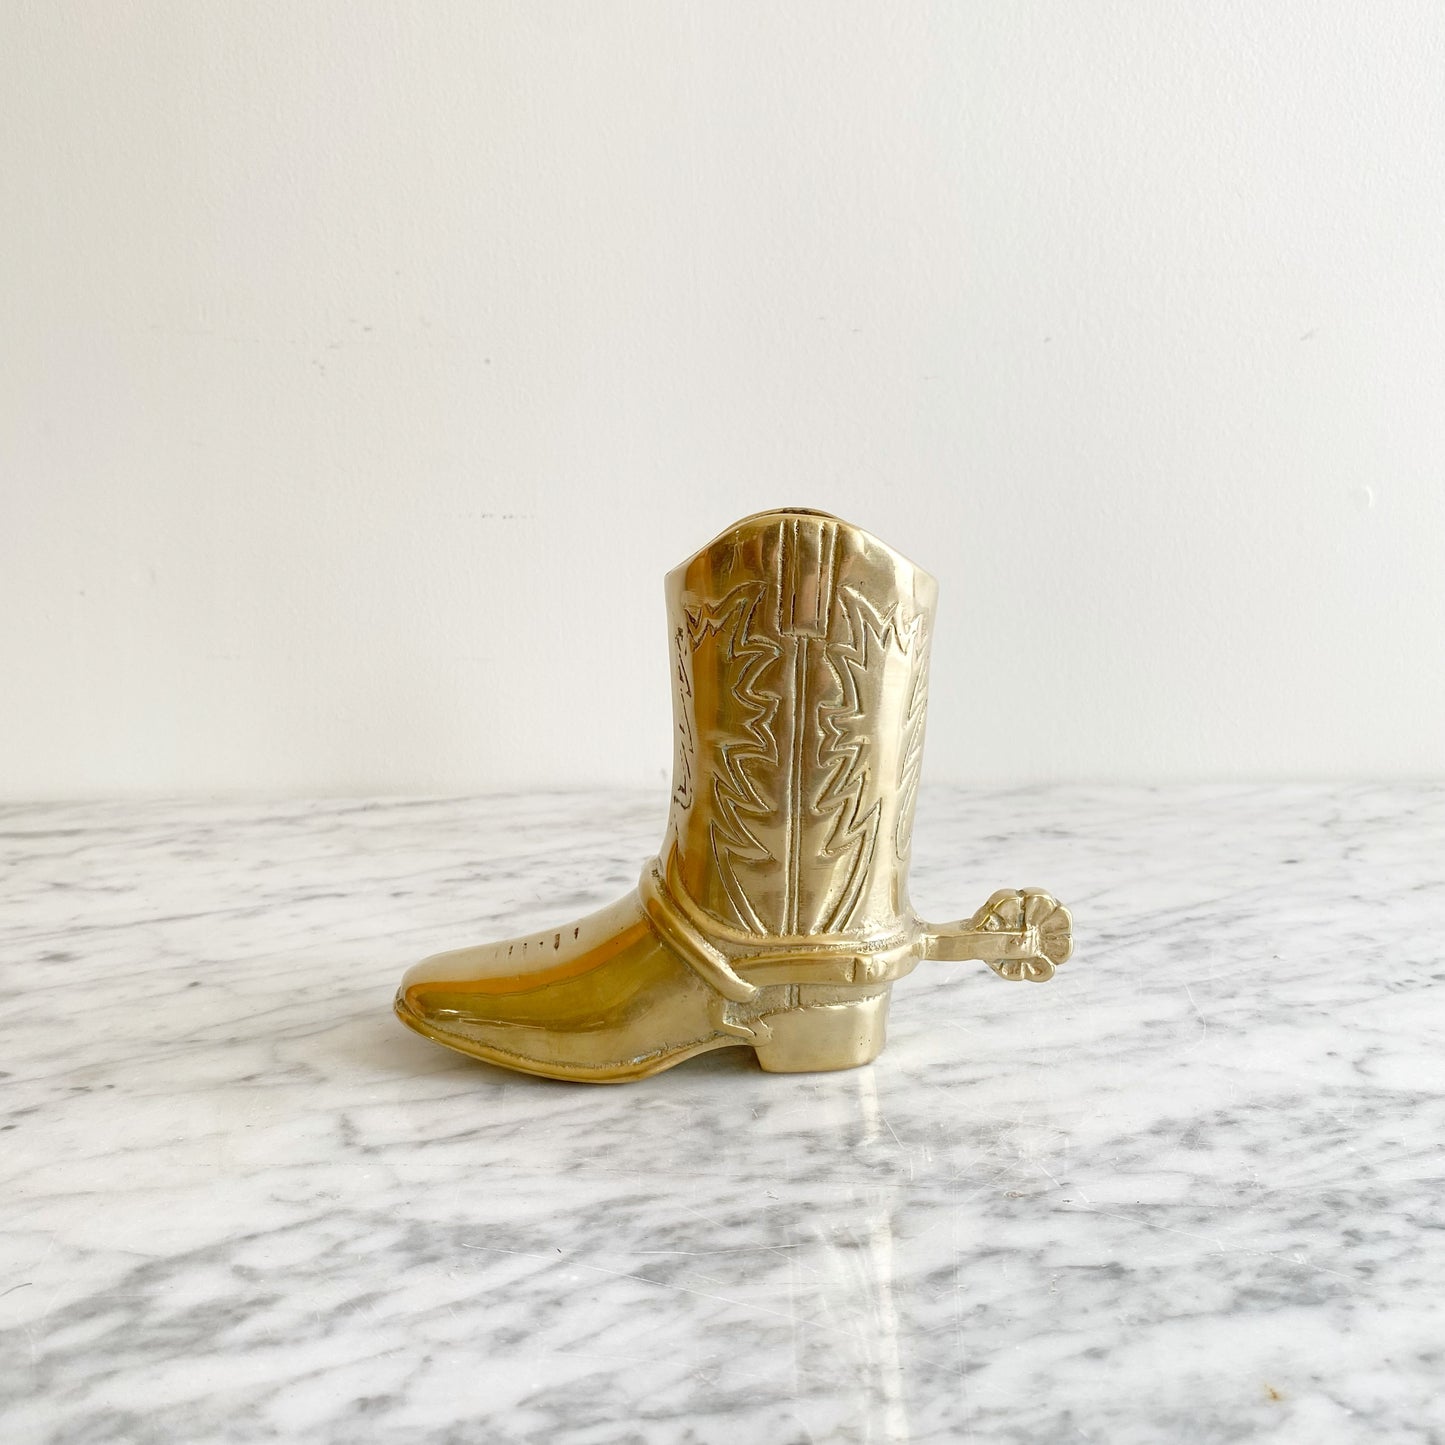 Vintage Brass Cowboy / Cowgirl Boot, 5"